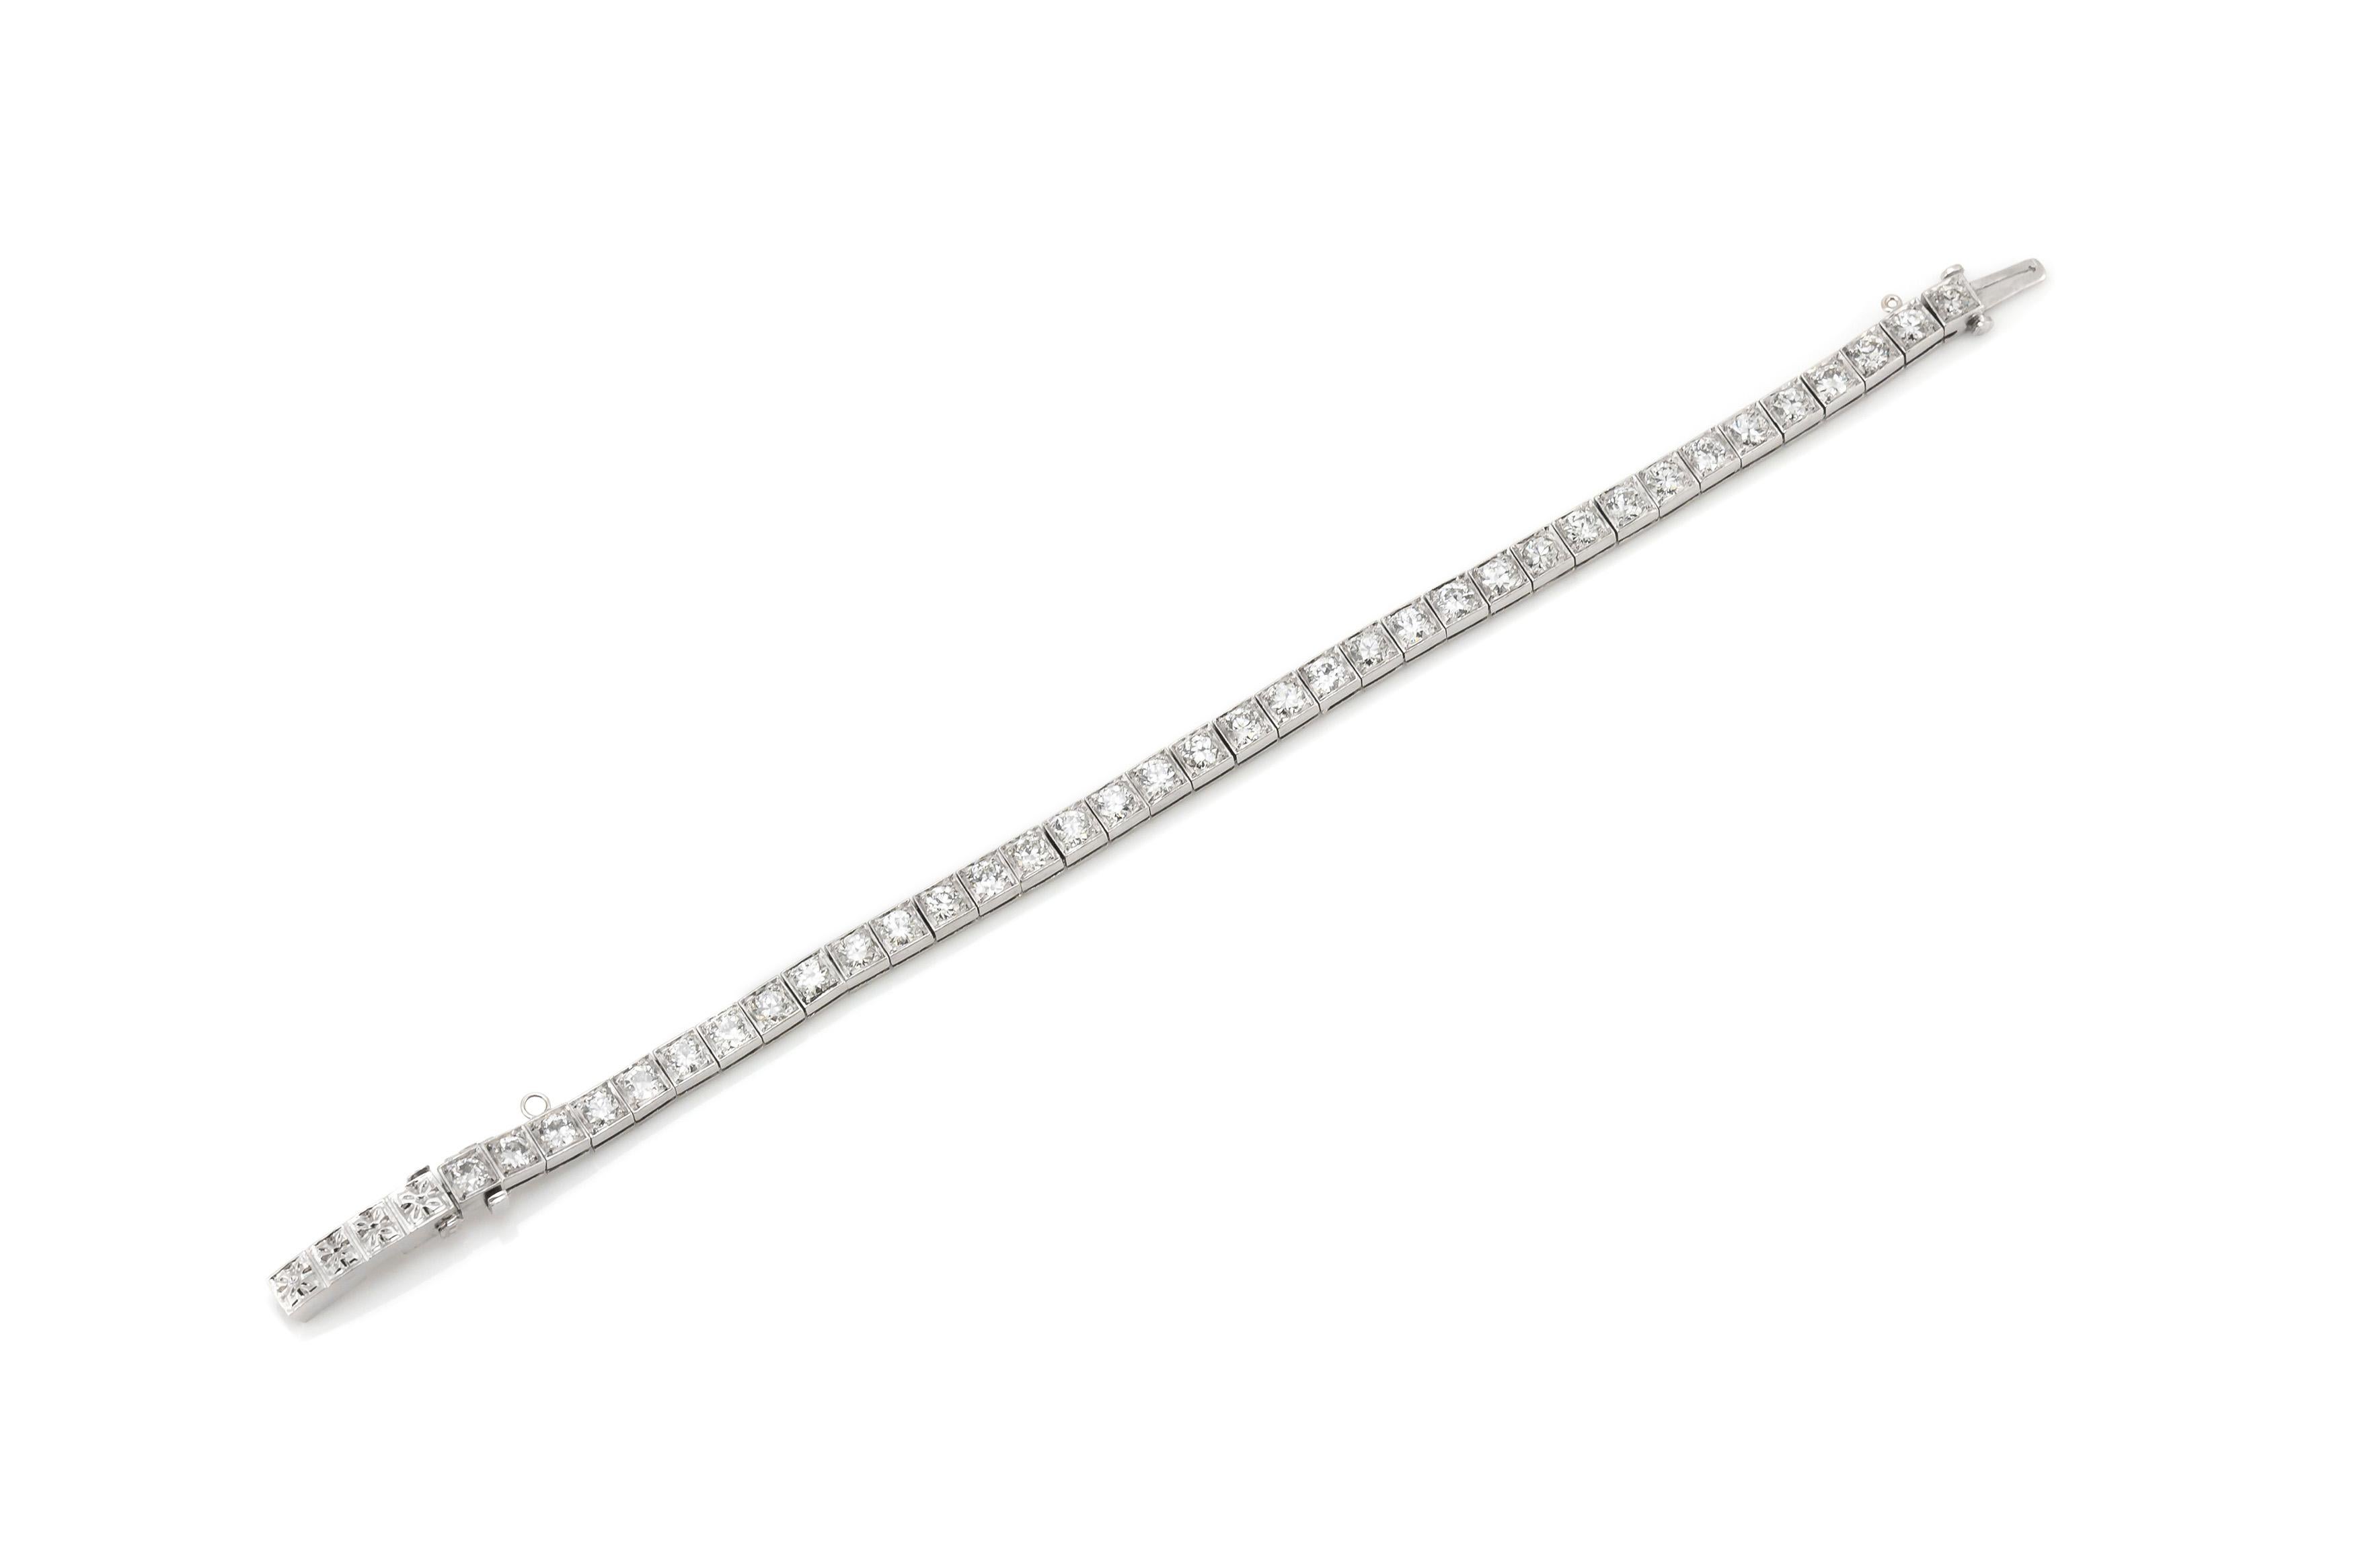 Beautiful straight line bracelet circa 1920 is finely crafted in platinum.
The diamonds weigh approximately 7.50ct